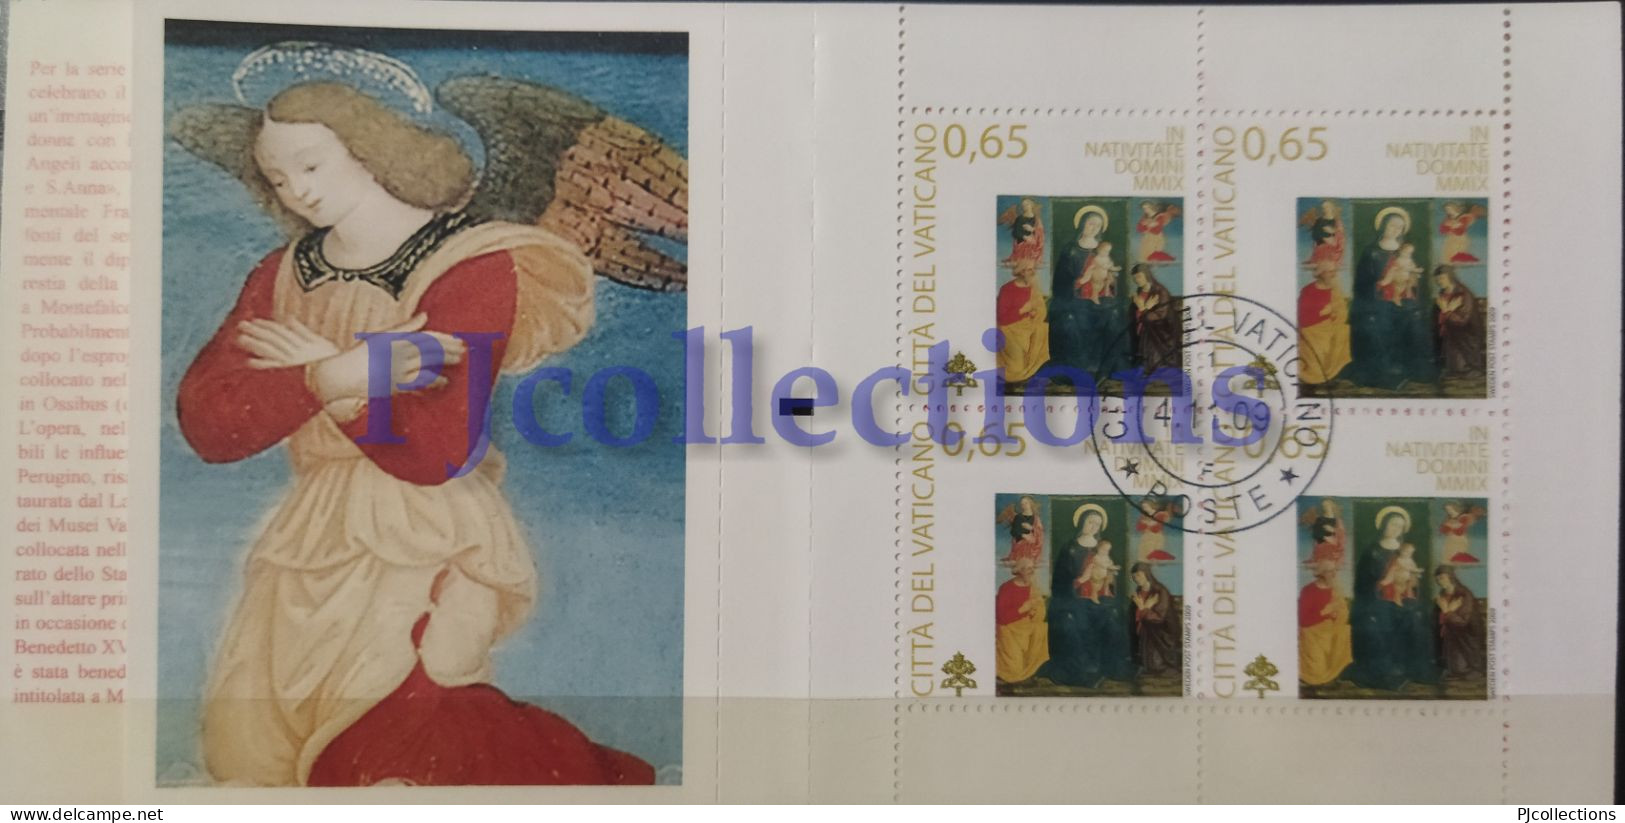 3764- VATICANO- VATICAN CITY 2009 NATALE - CHRISTMAS FULL BOOKLET 4 STAMPS C/ANNULLO 1° GIORNO - USED - Used Stamps